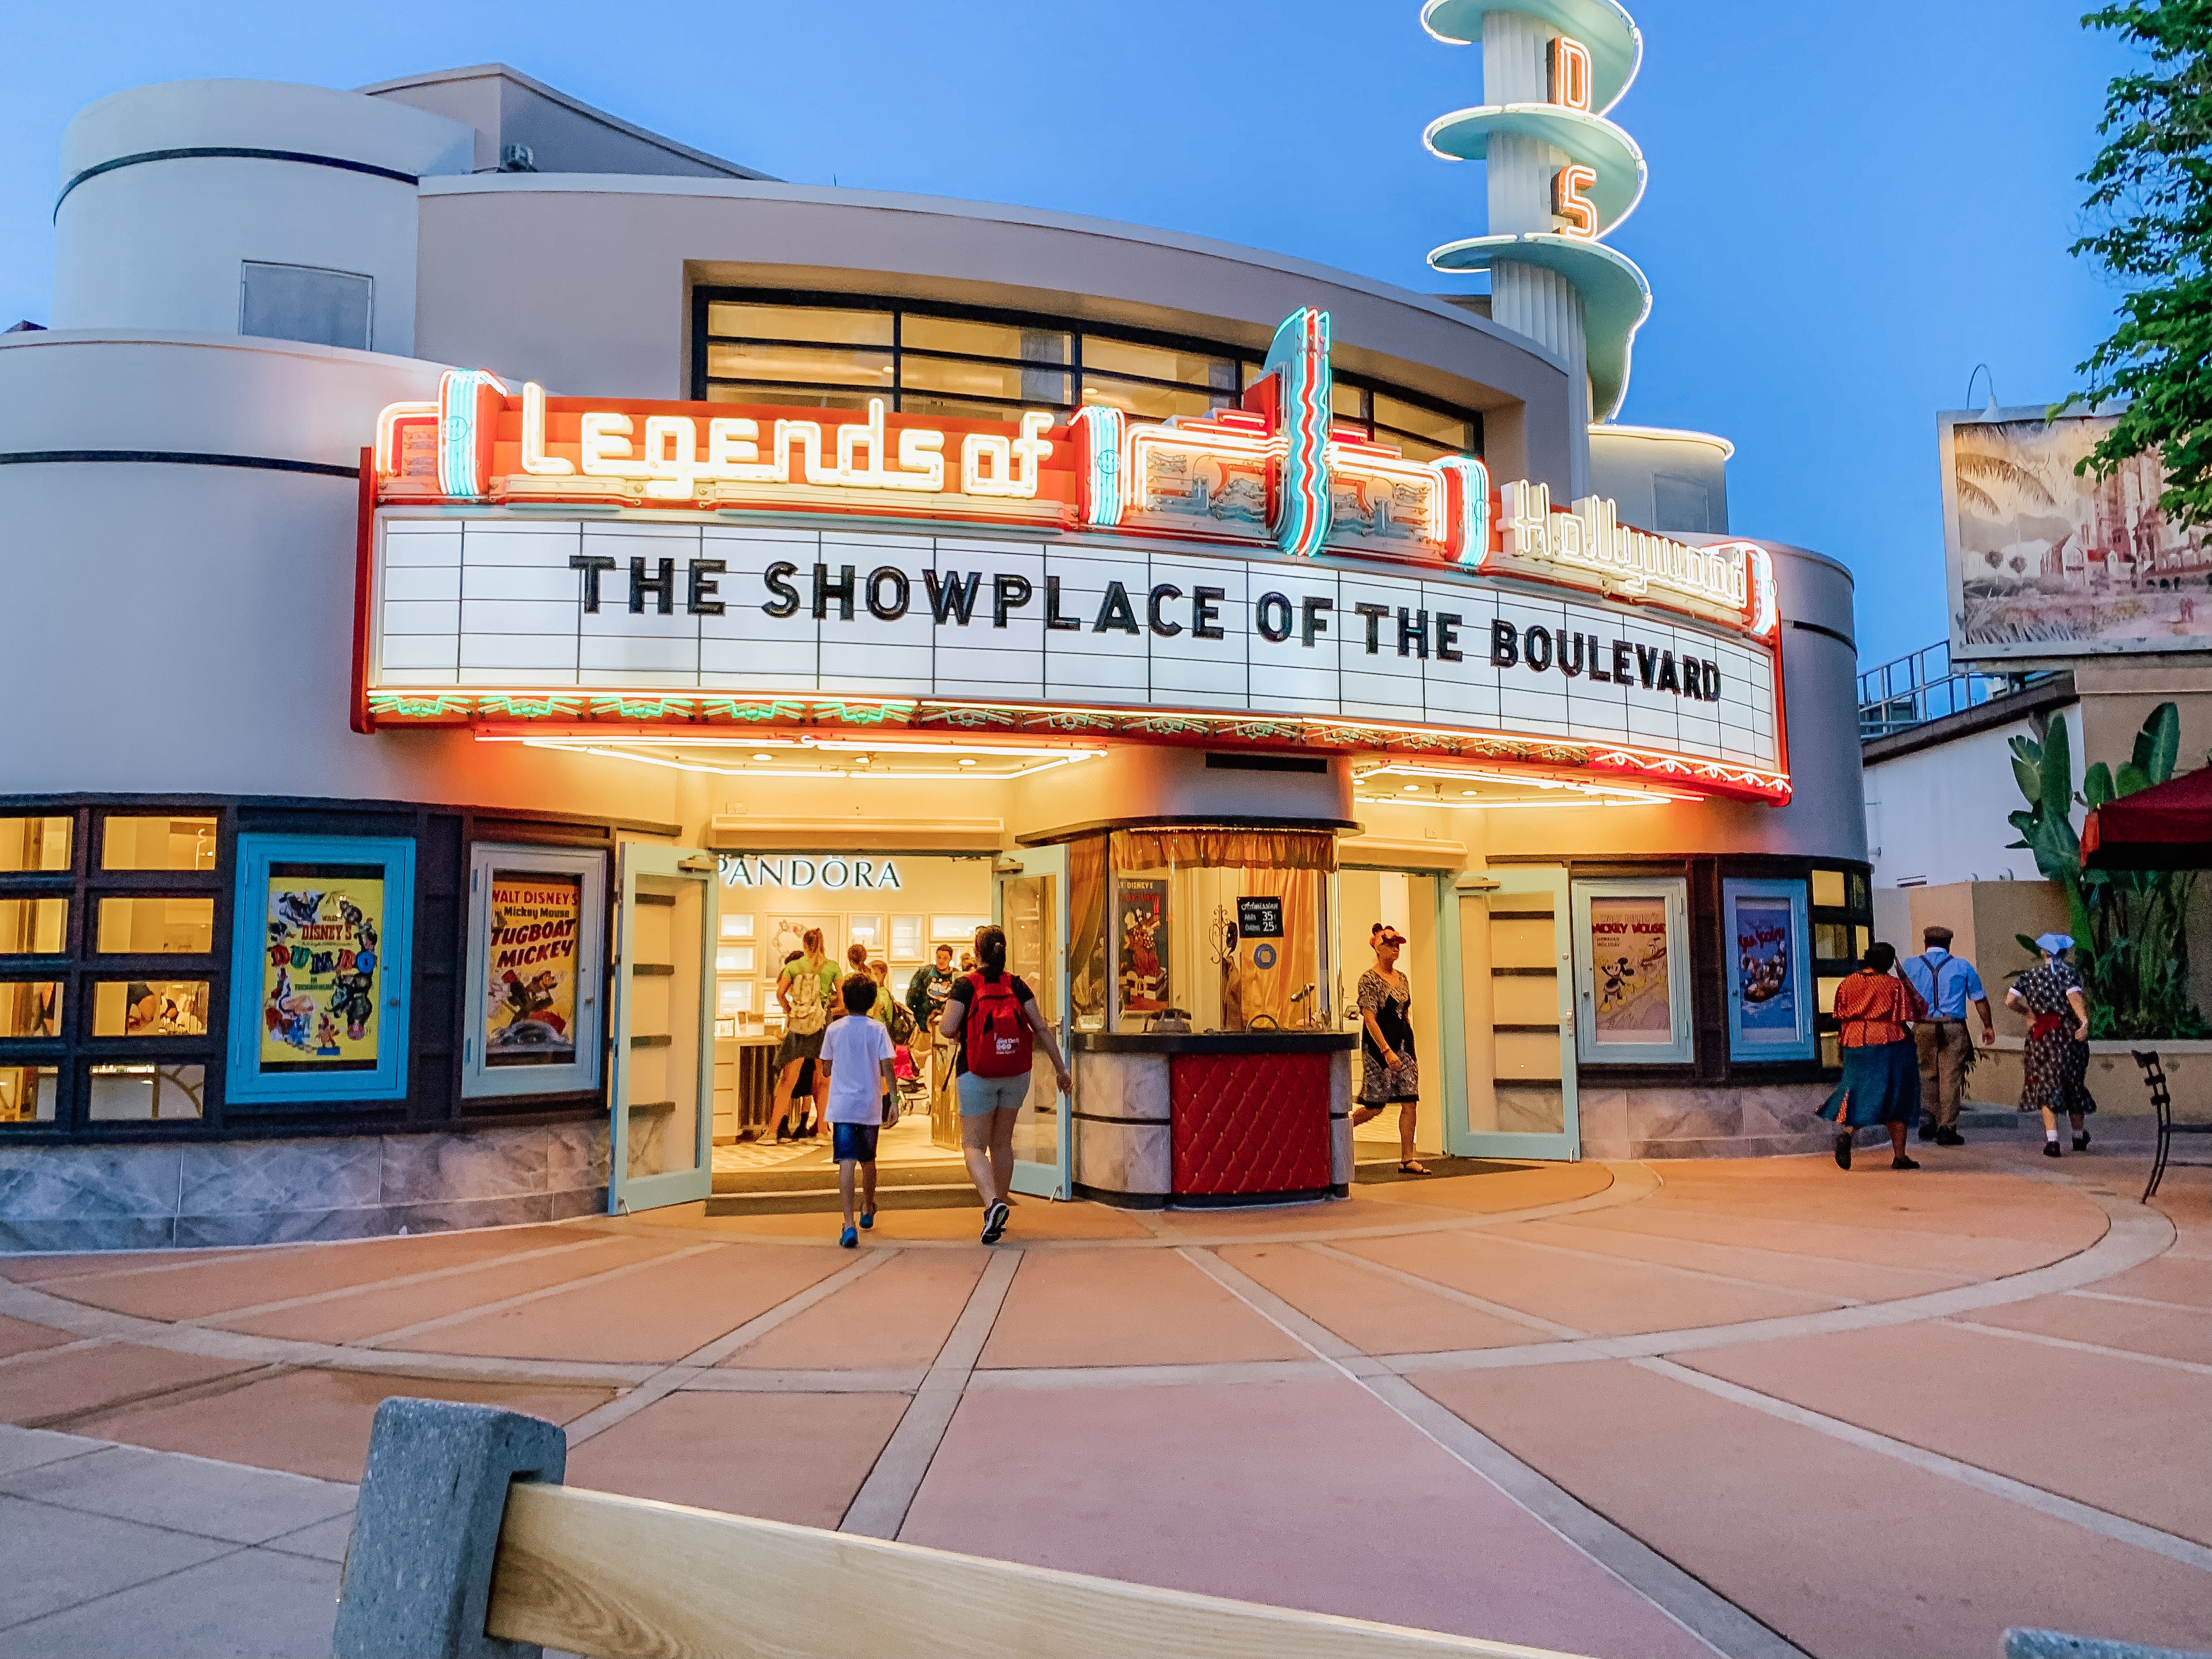 Legends of Hollywood Reopens with Pandora Inside